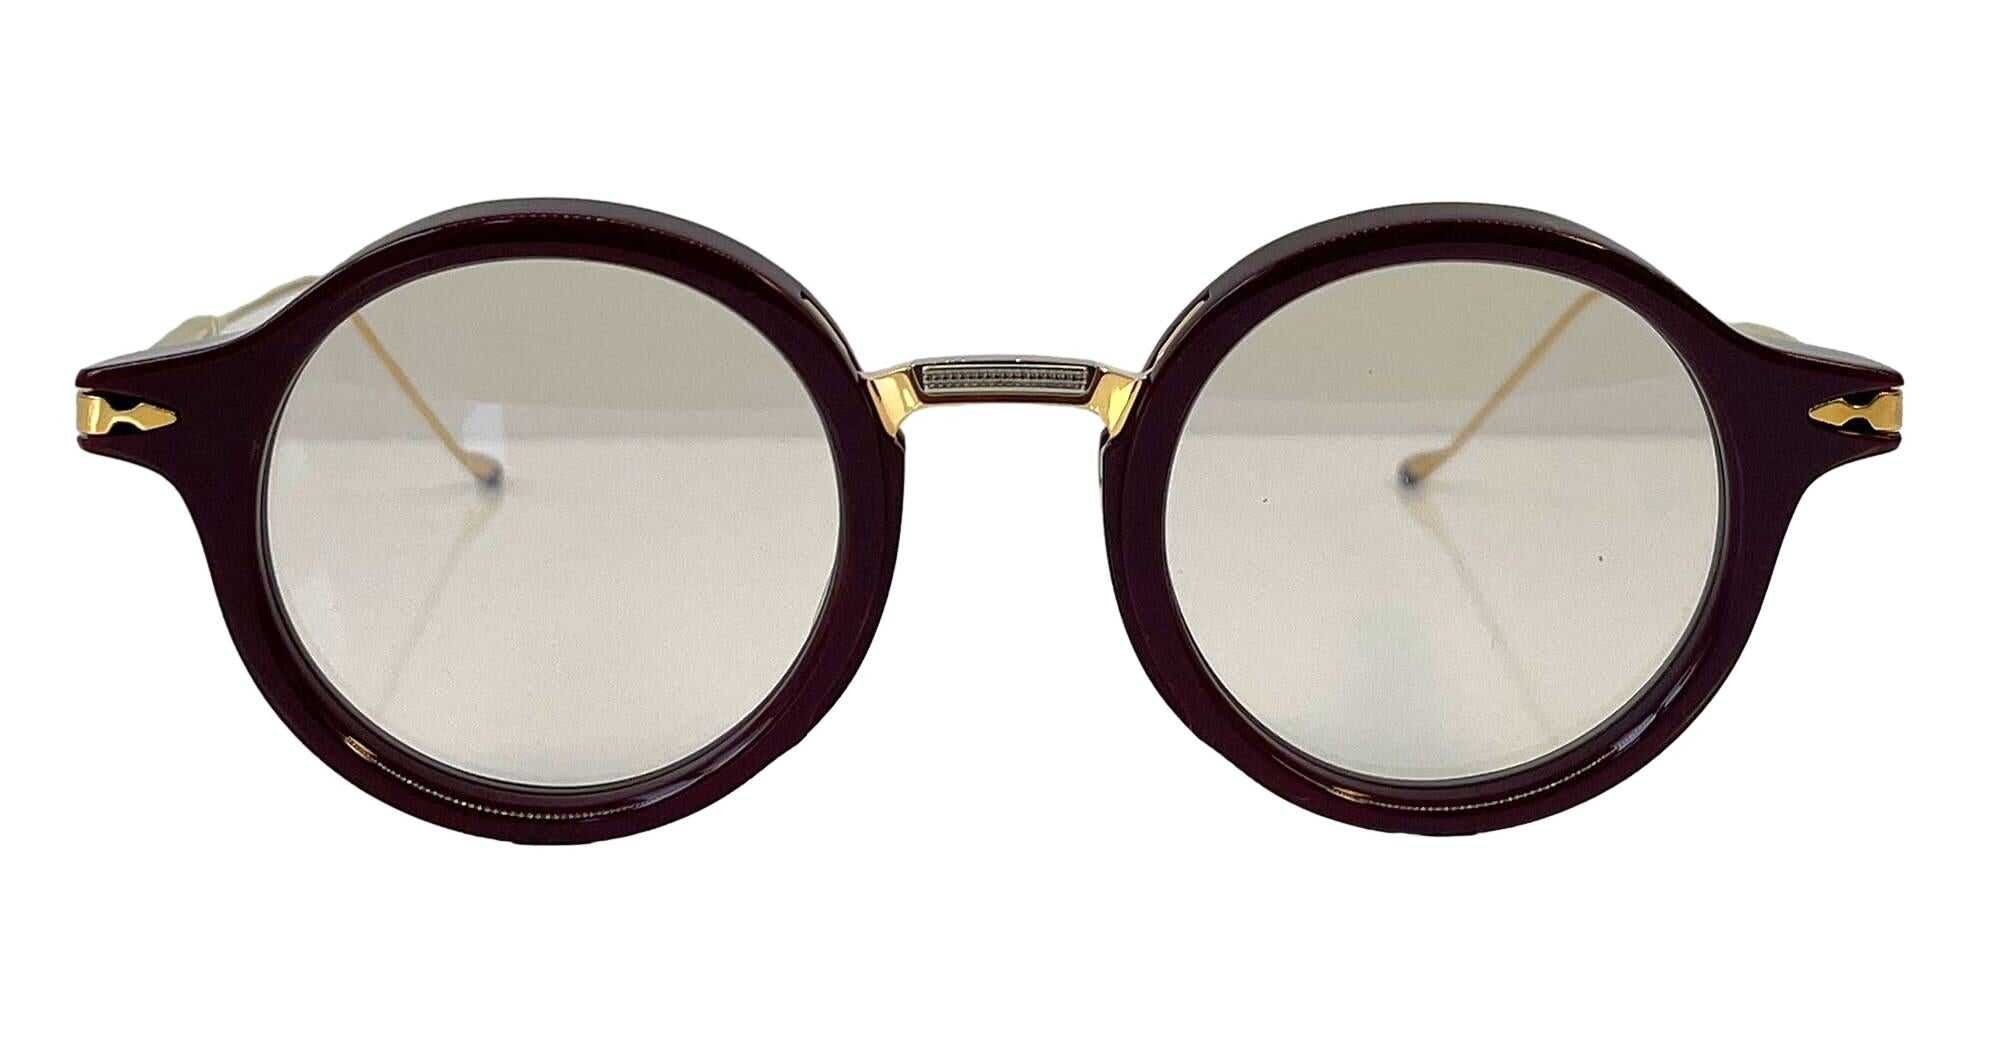 JACQUES MARIE MAGE Jacques Marie Mage EYEGLASSES BURGUNDY